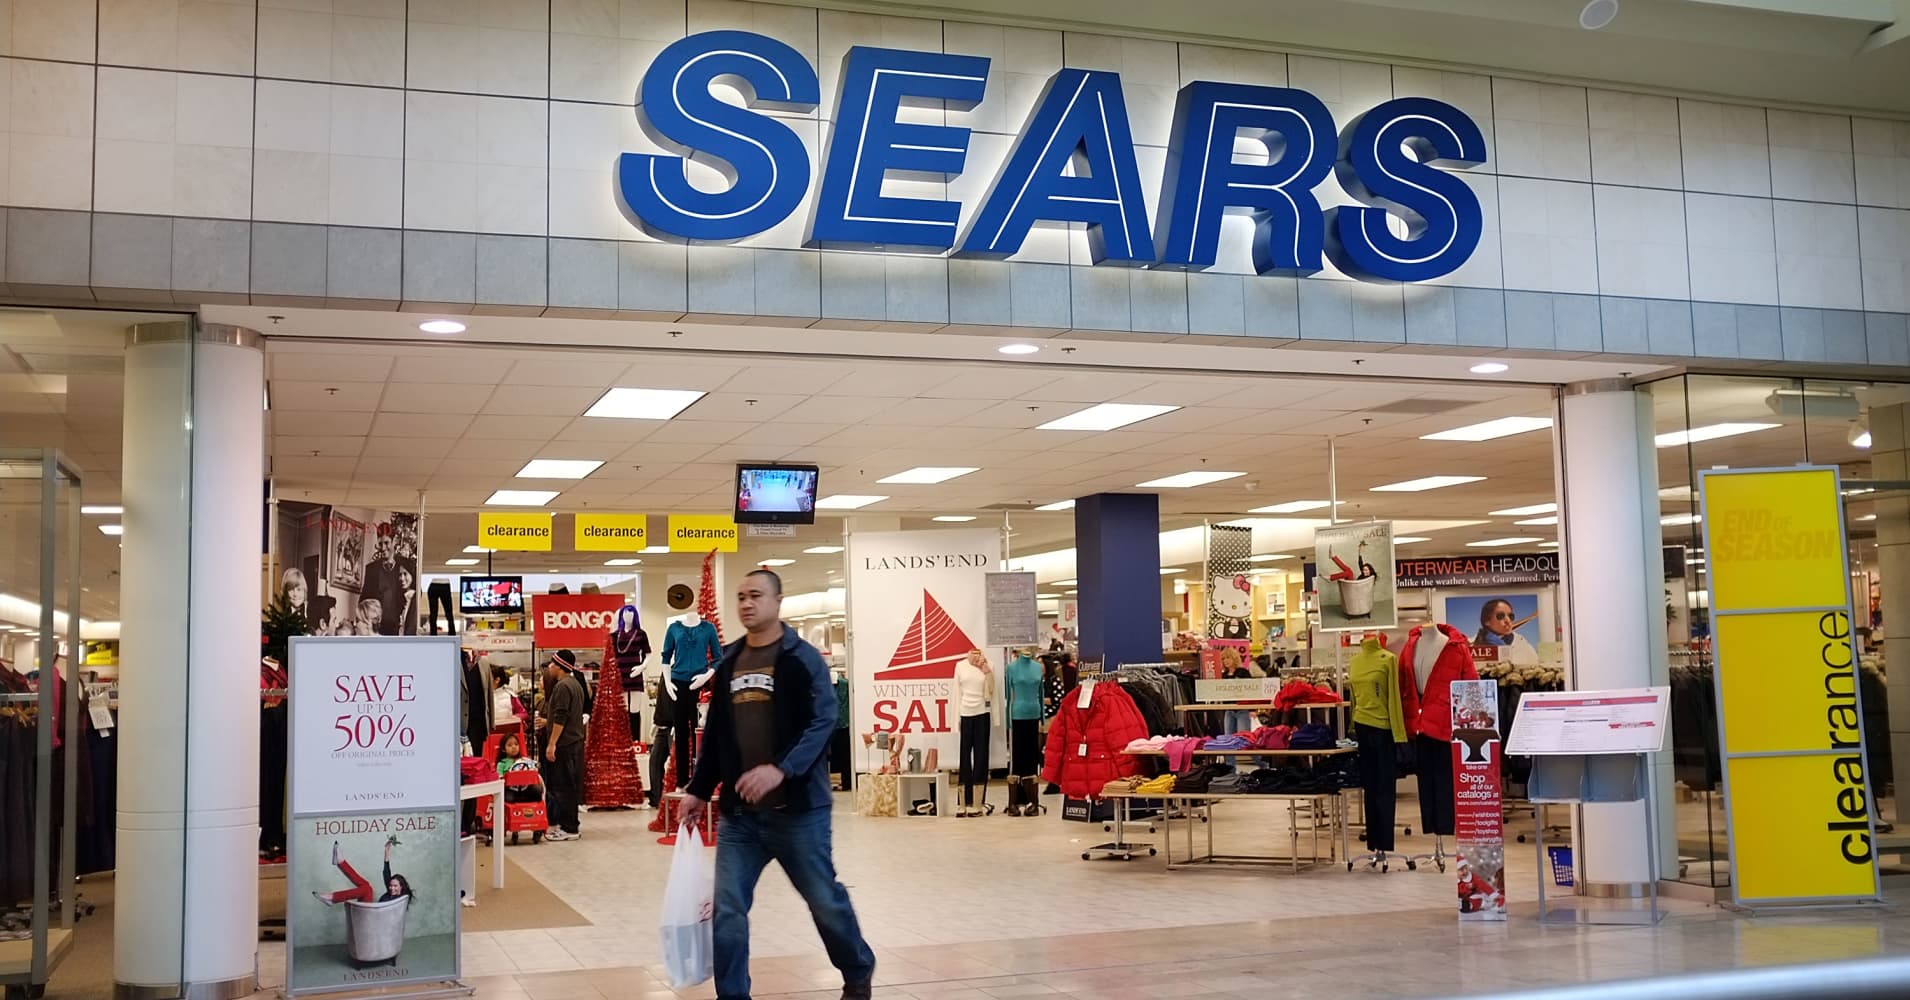 Why Amazon should acquire Sears: Retail expert